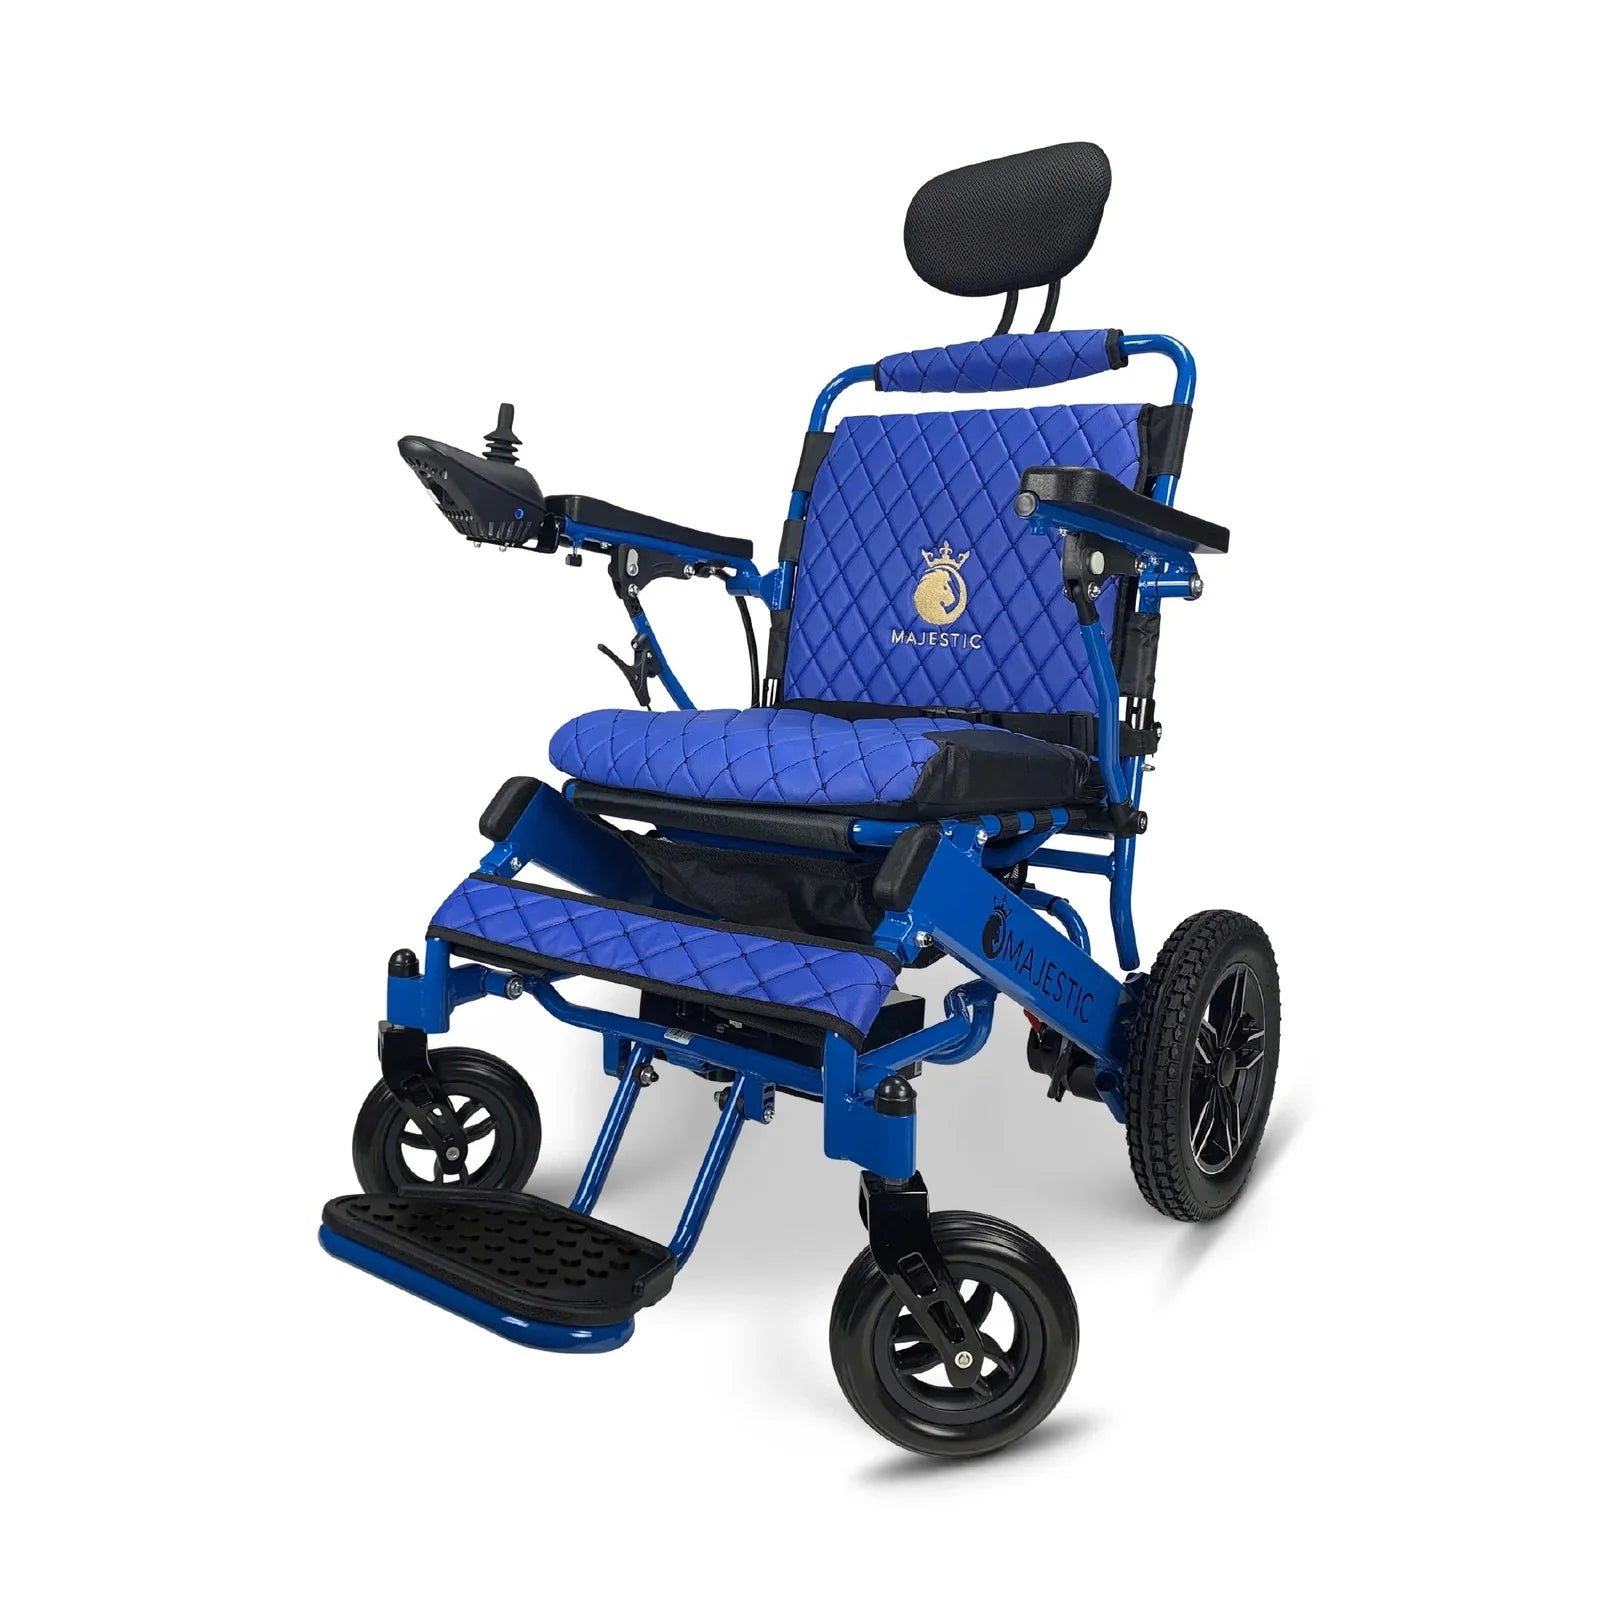 ComfyGO Majestic IQ-8000 Remote Controlled Lightweight Folding Electric Wheelchair Power Wheelchairs ComfyGO Blue Blue 10 Miles & 17.5" Seat Width